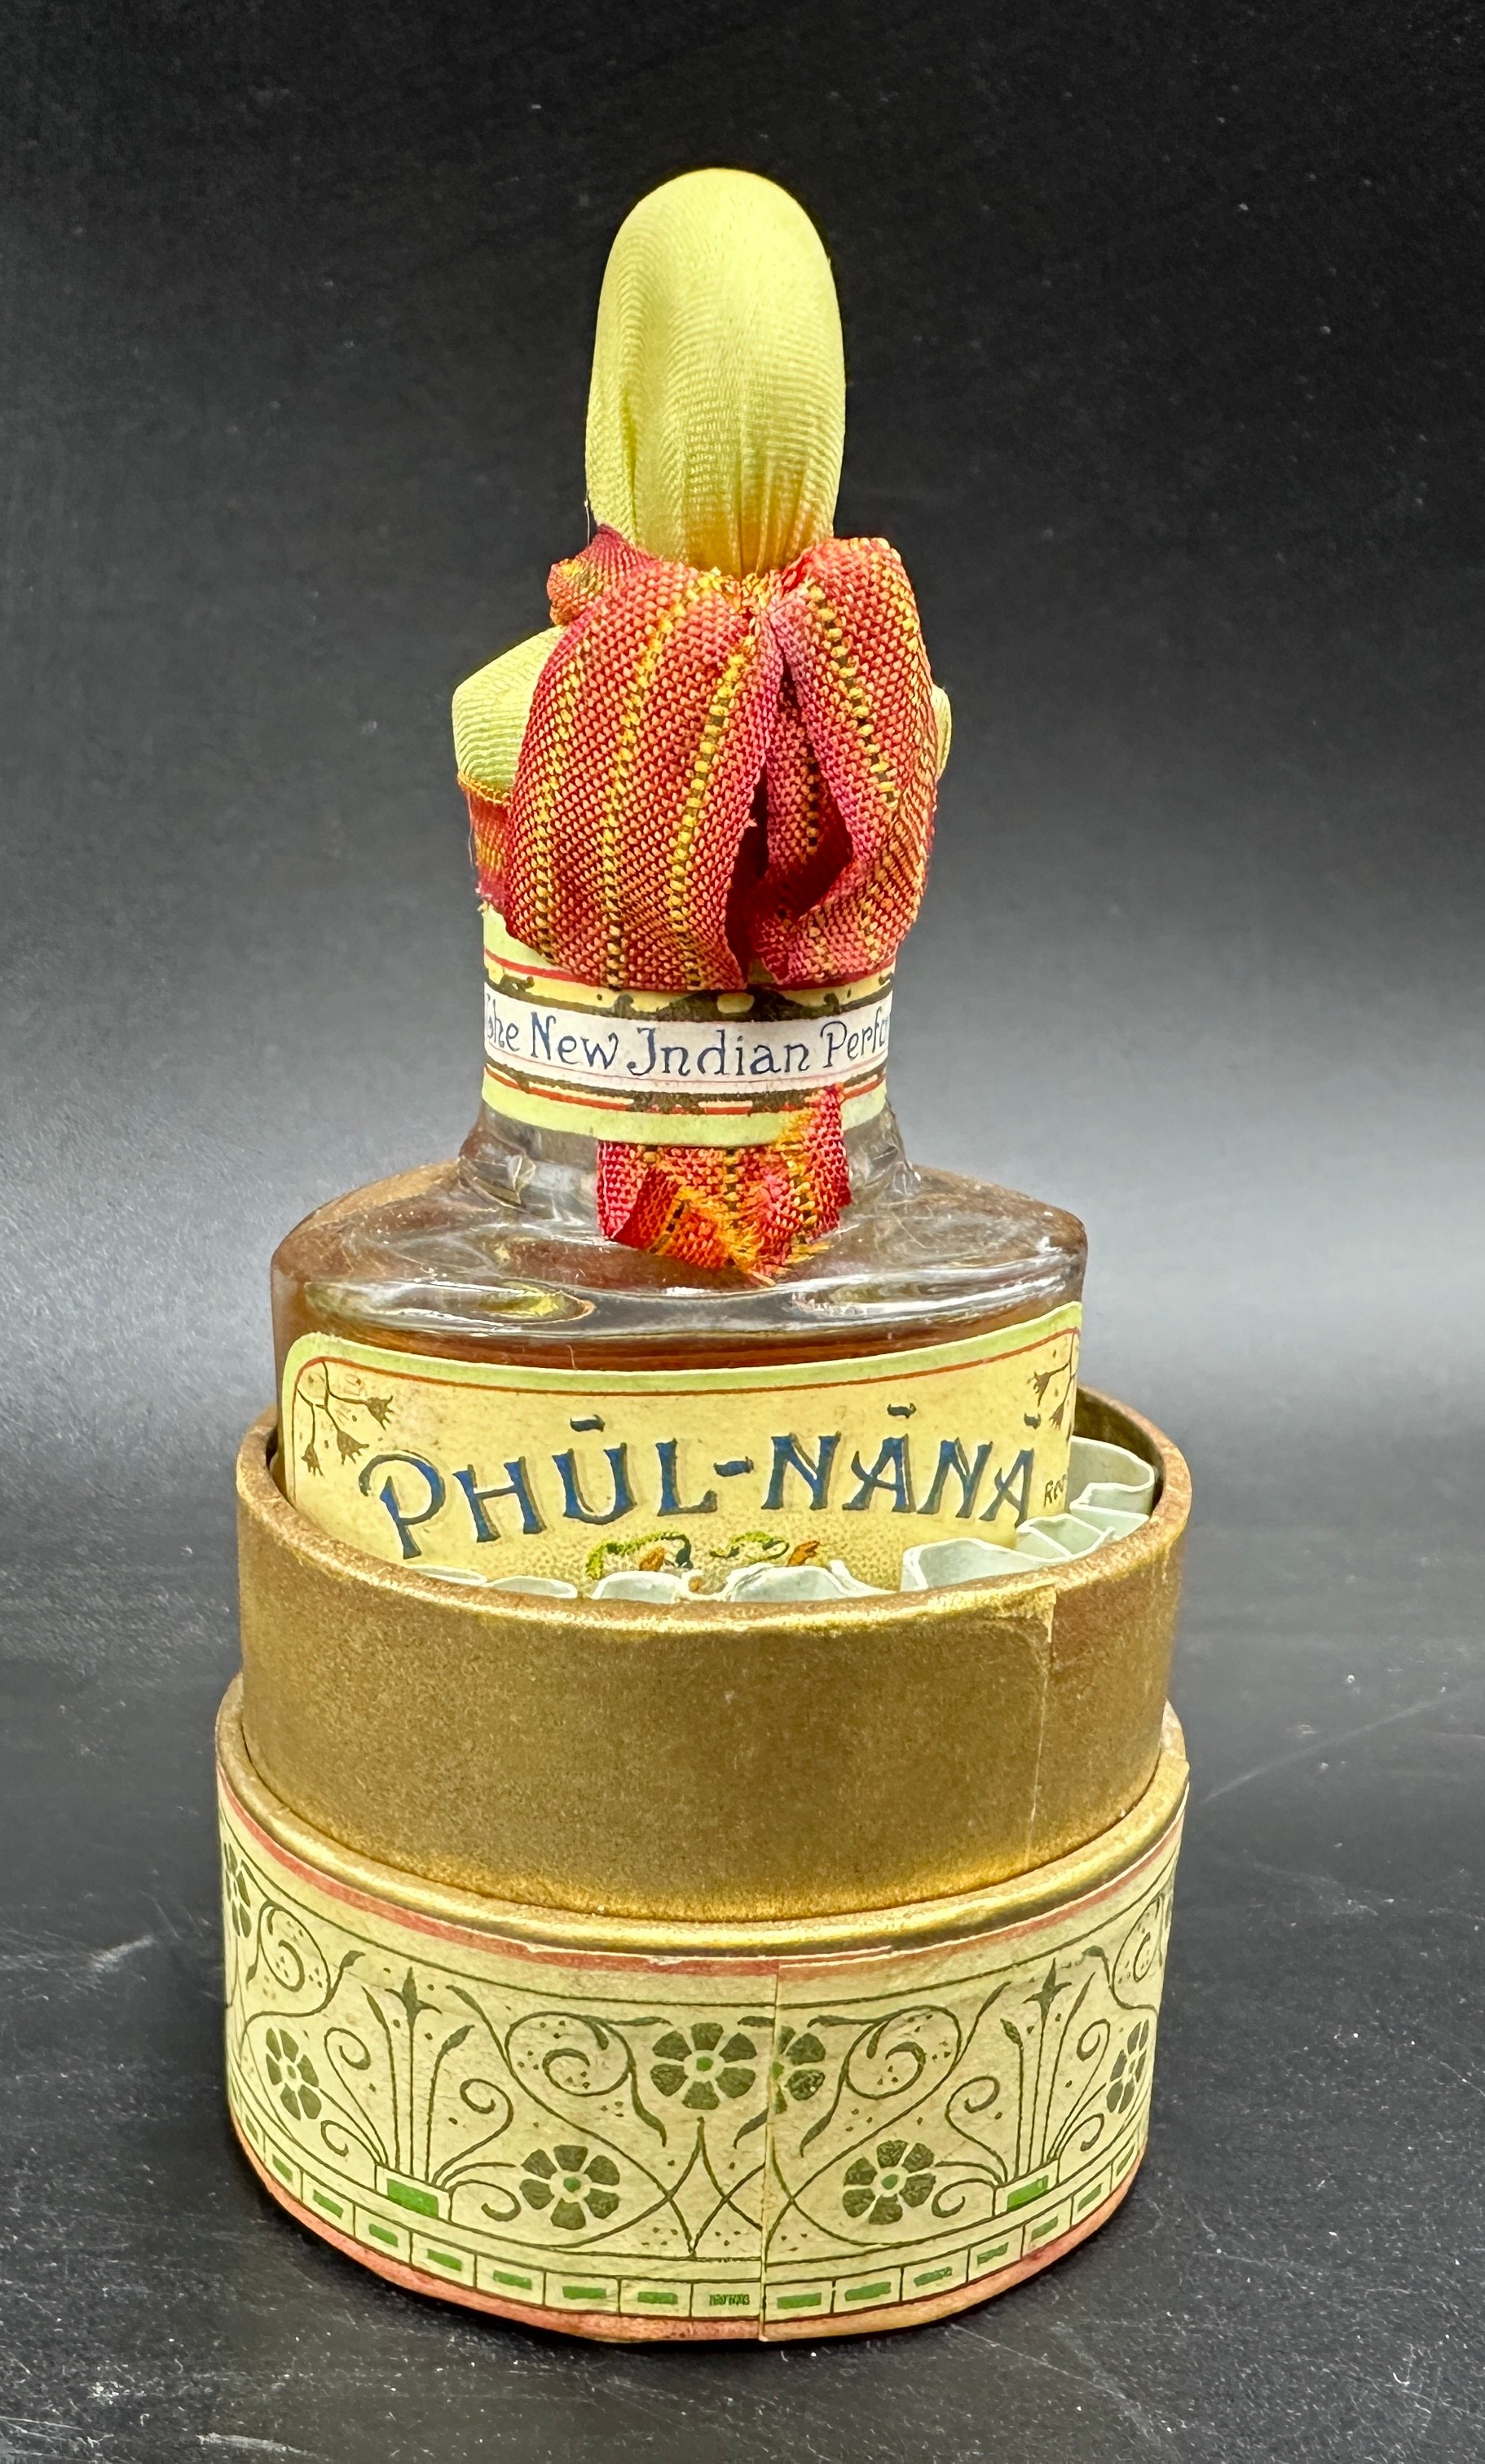 A sealed Phul-Nana 'Bouquet of Indian Flowers' perfume bottle by J. Grossmith & Son in original - Image 4 of 4